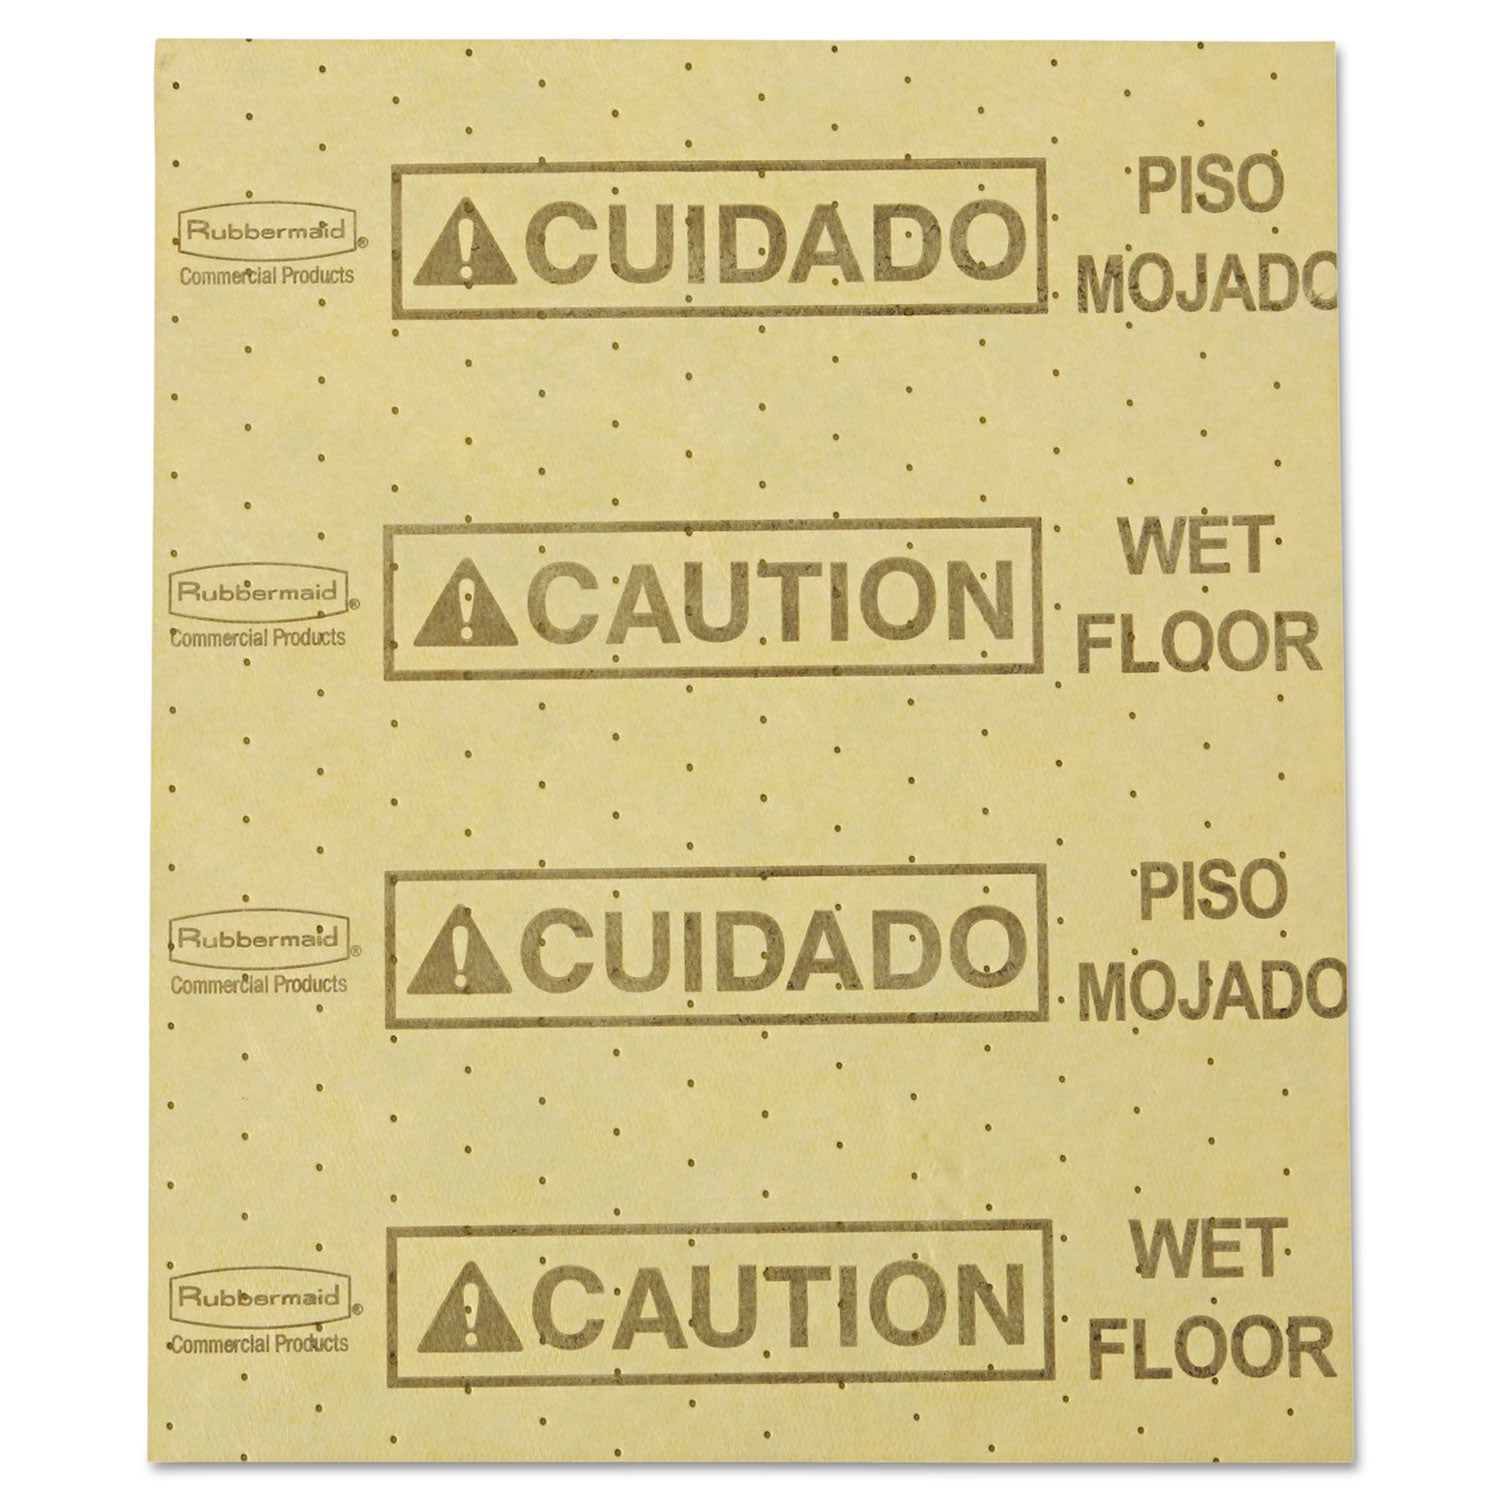 Over-the-Spill Pad, Caution Wet Floor, 16 oz, 16.5 x 20, 22 Sheets/Pad - 1